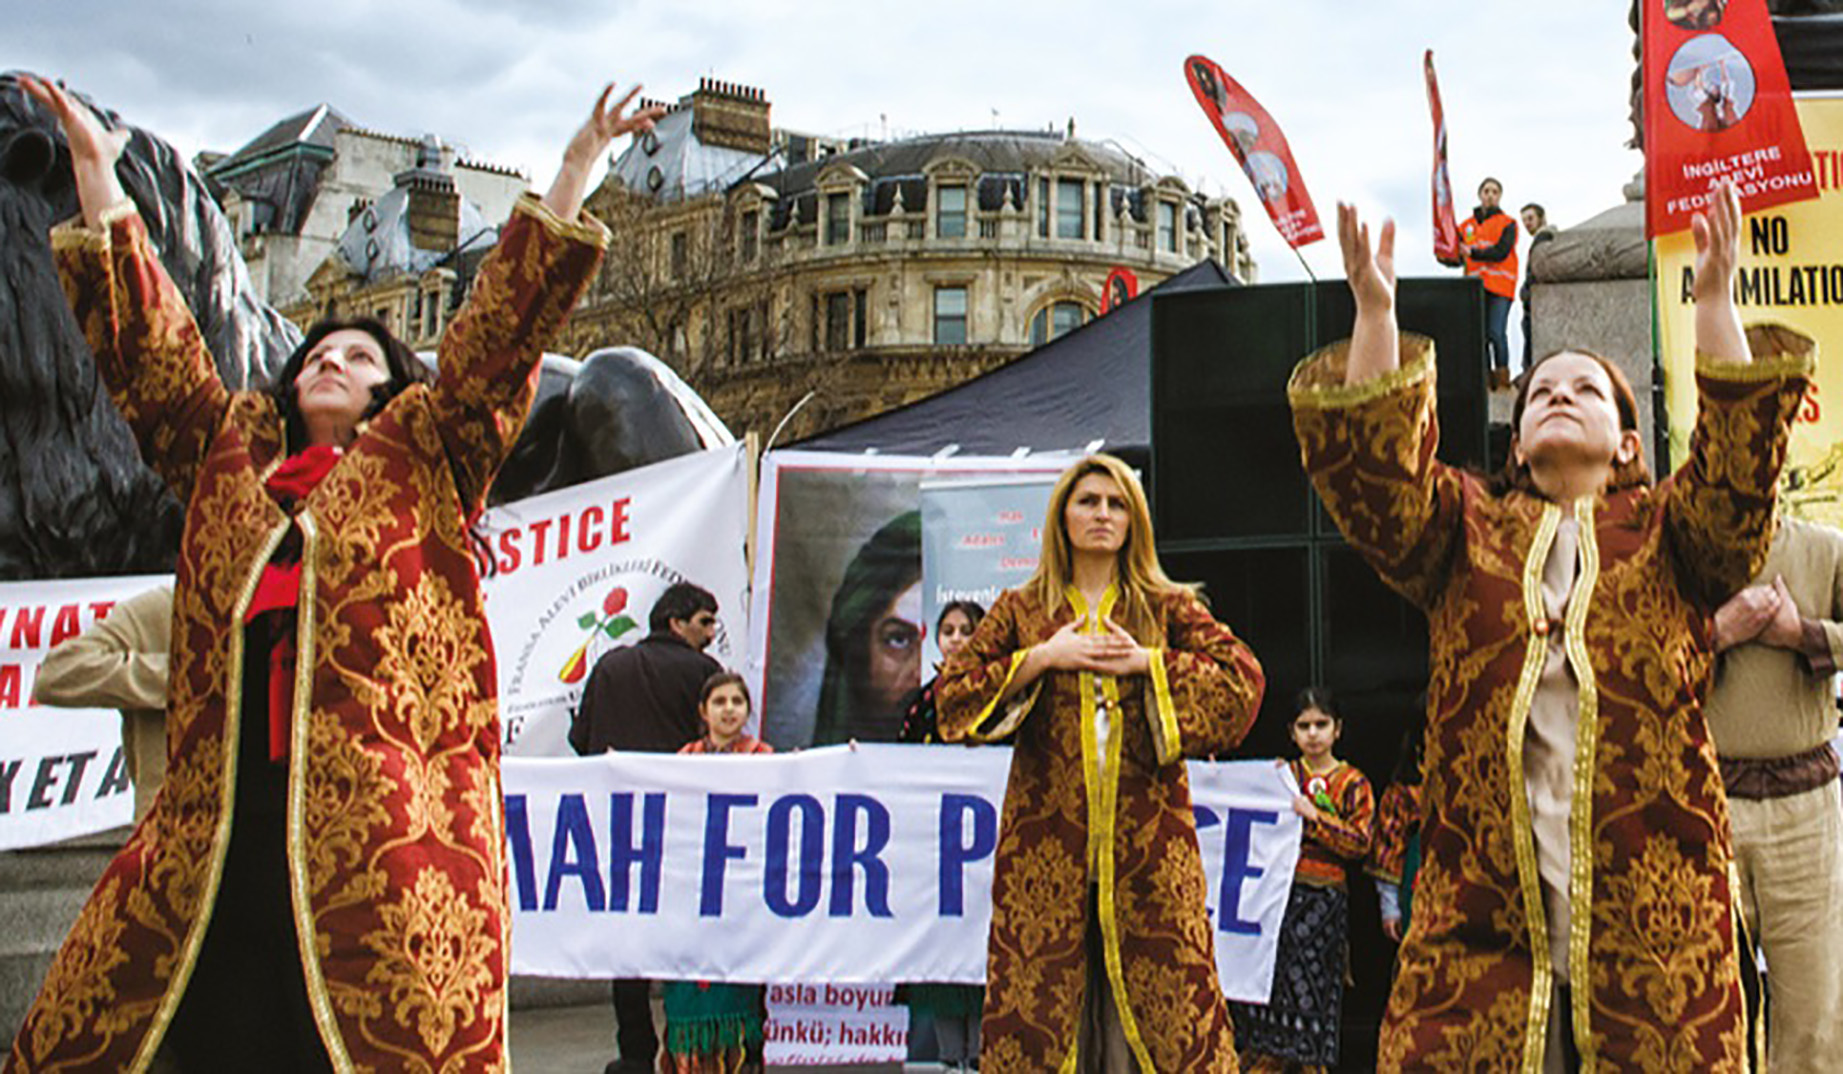 Photograph of Alevis people at a demonstration in London.